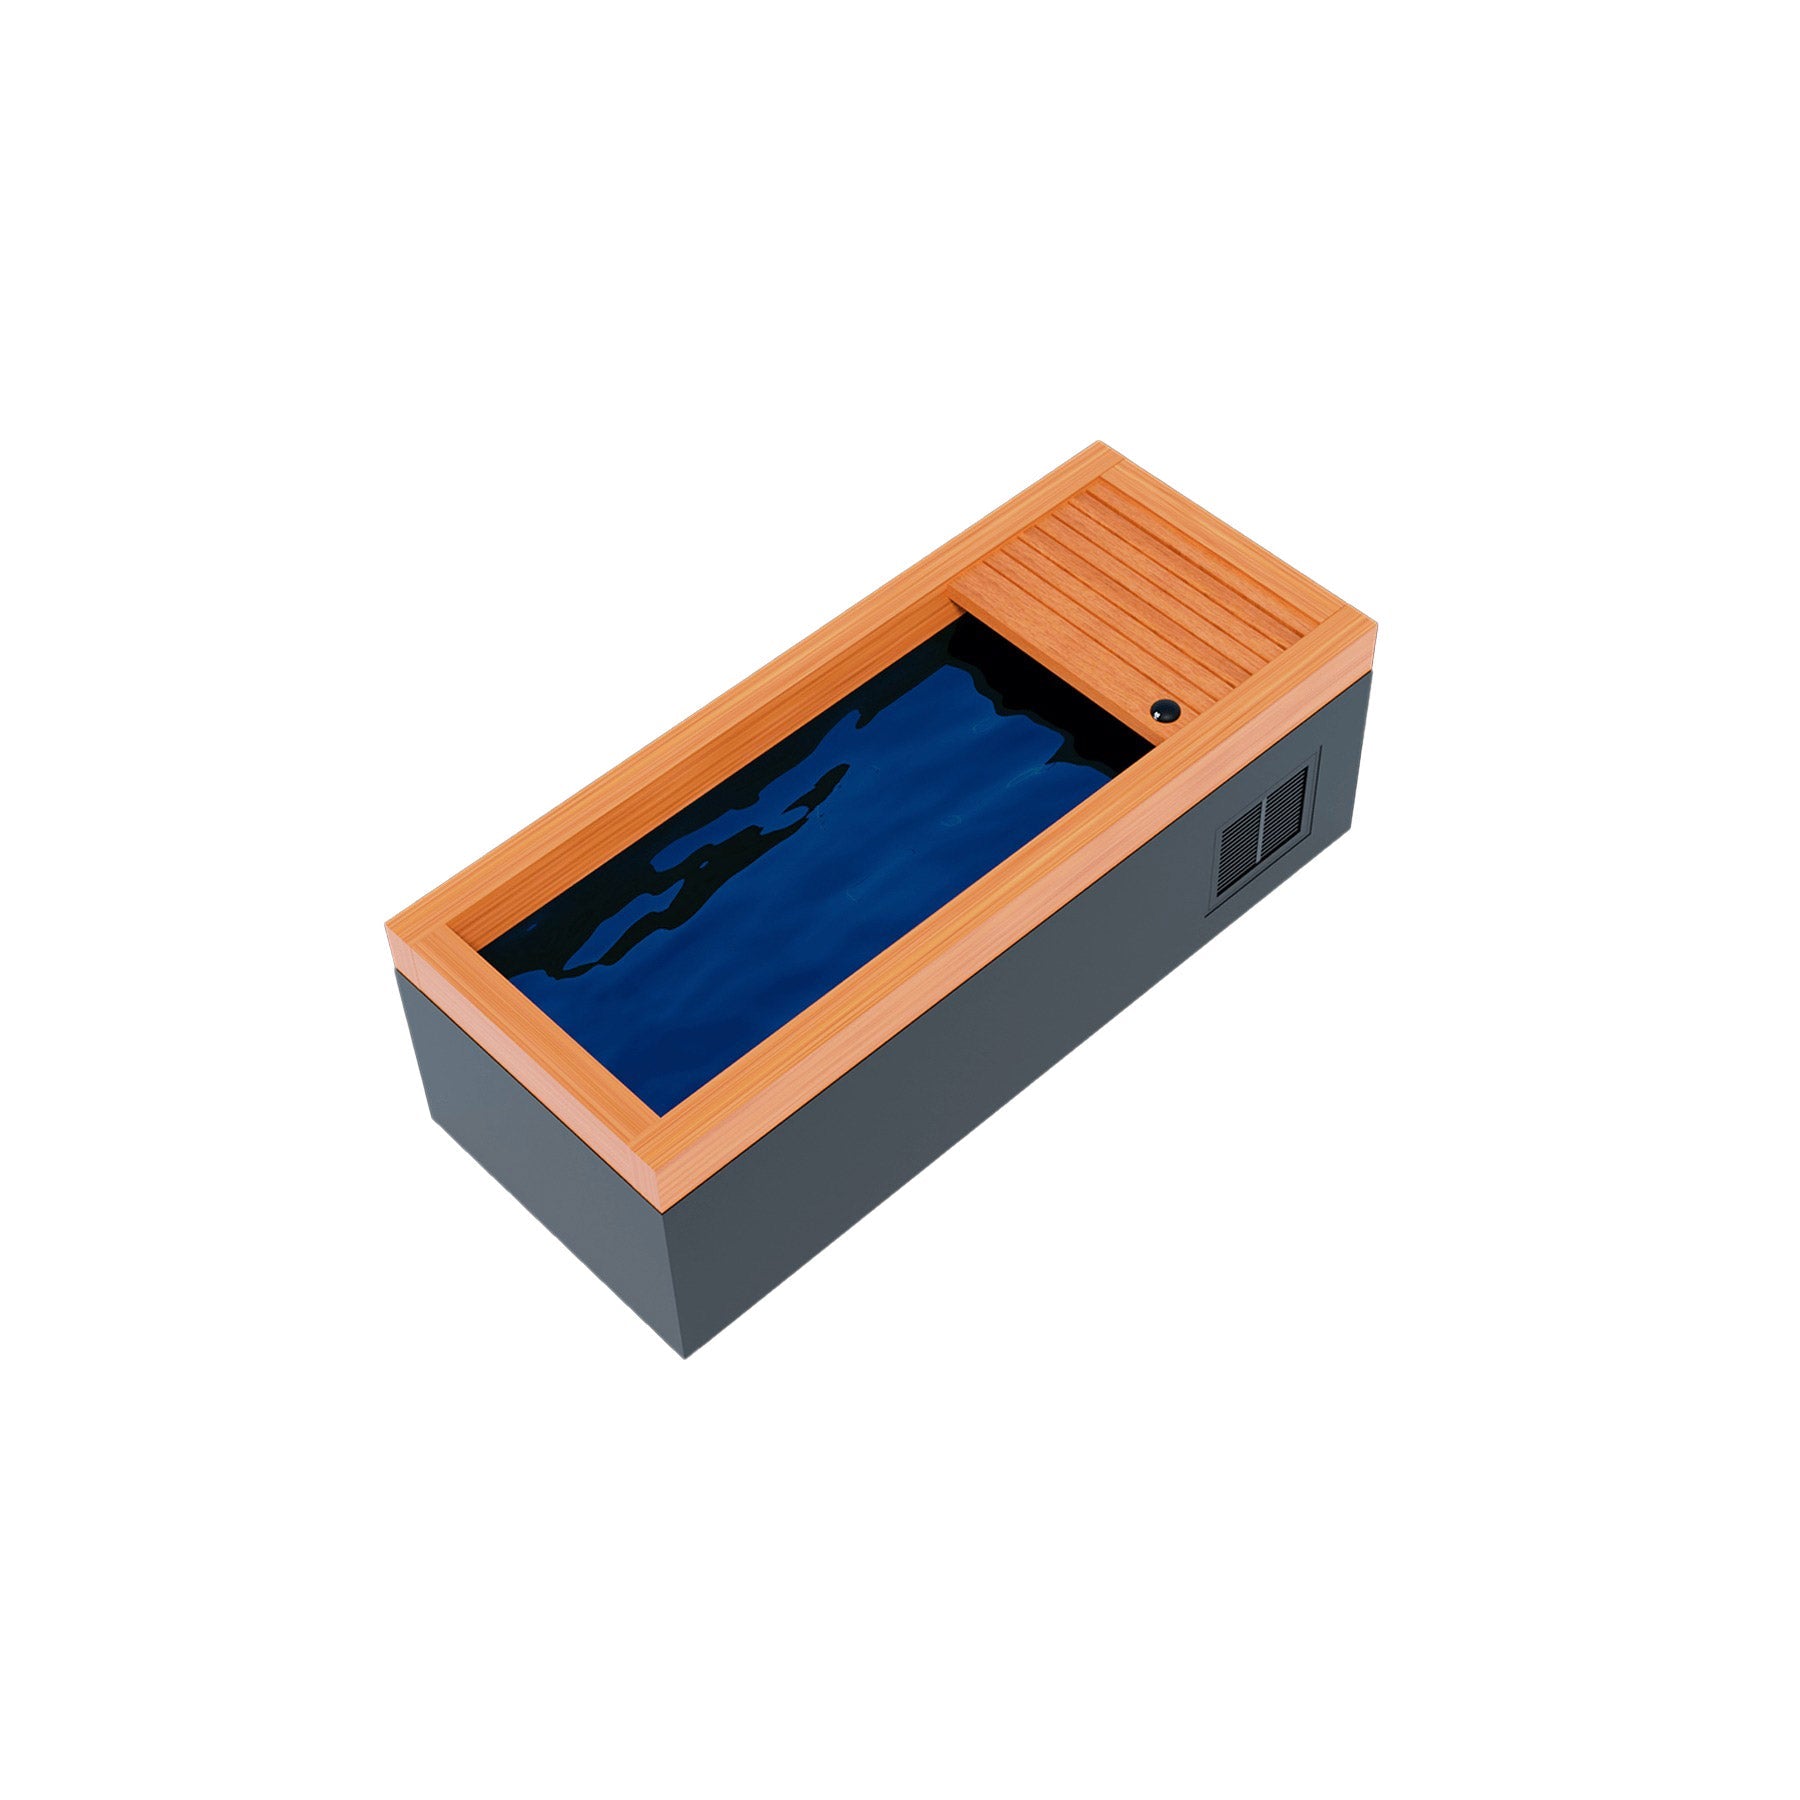 A 3d model of a wooden box with a blue water in it, featuring the Medical Sauna Frozen 4 Cold Plunge concept.